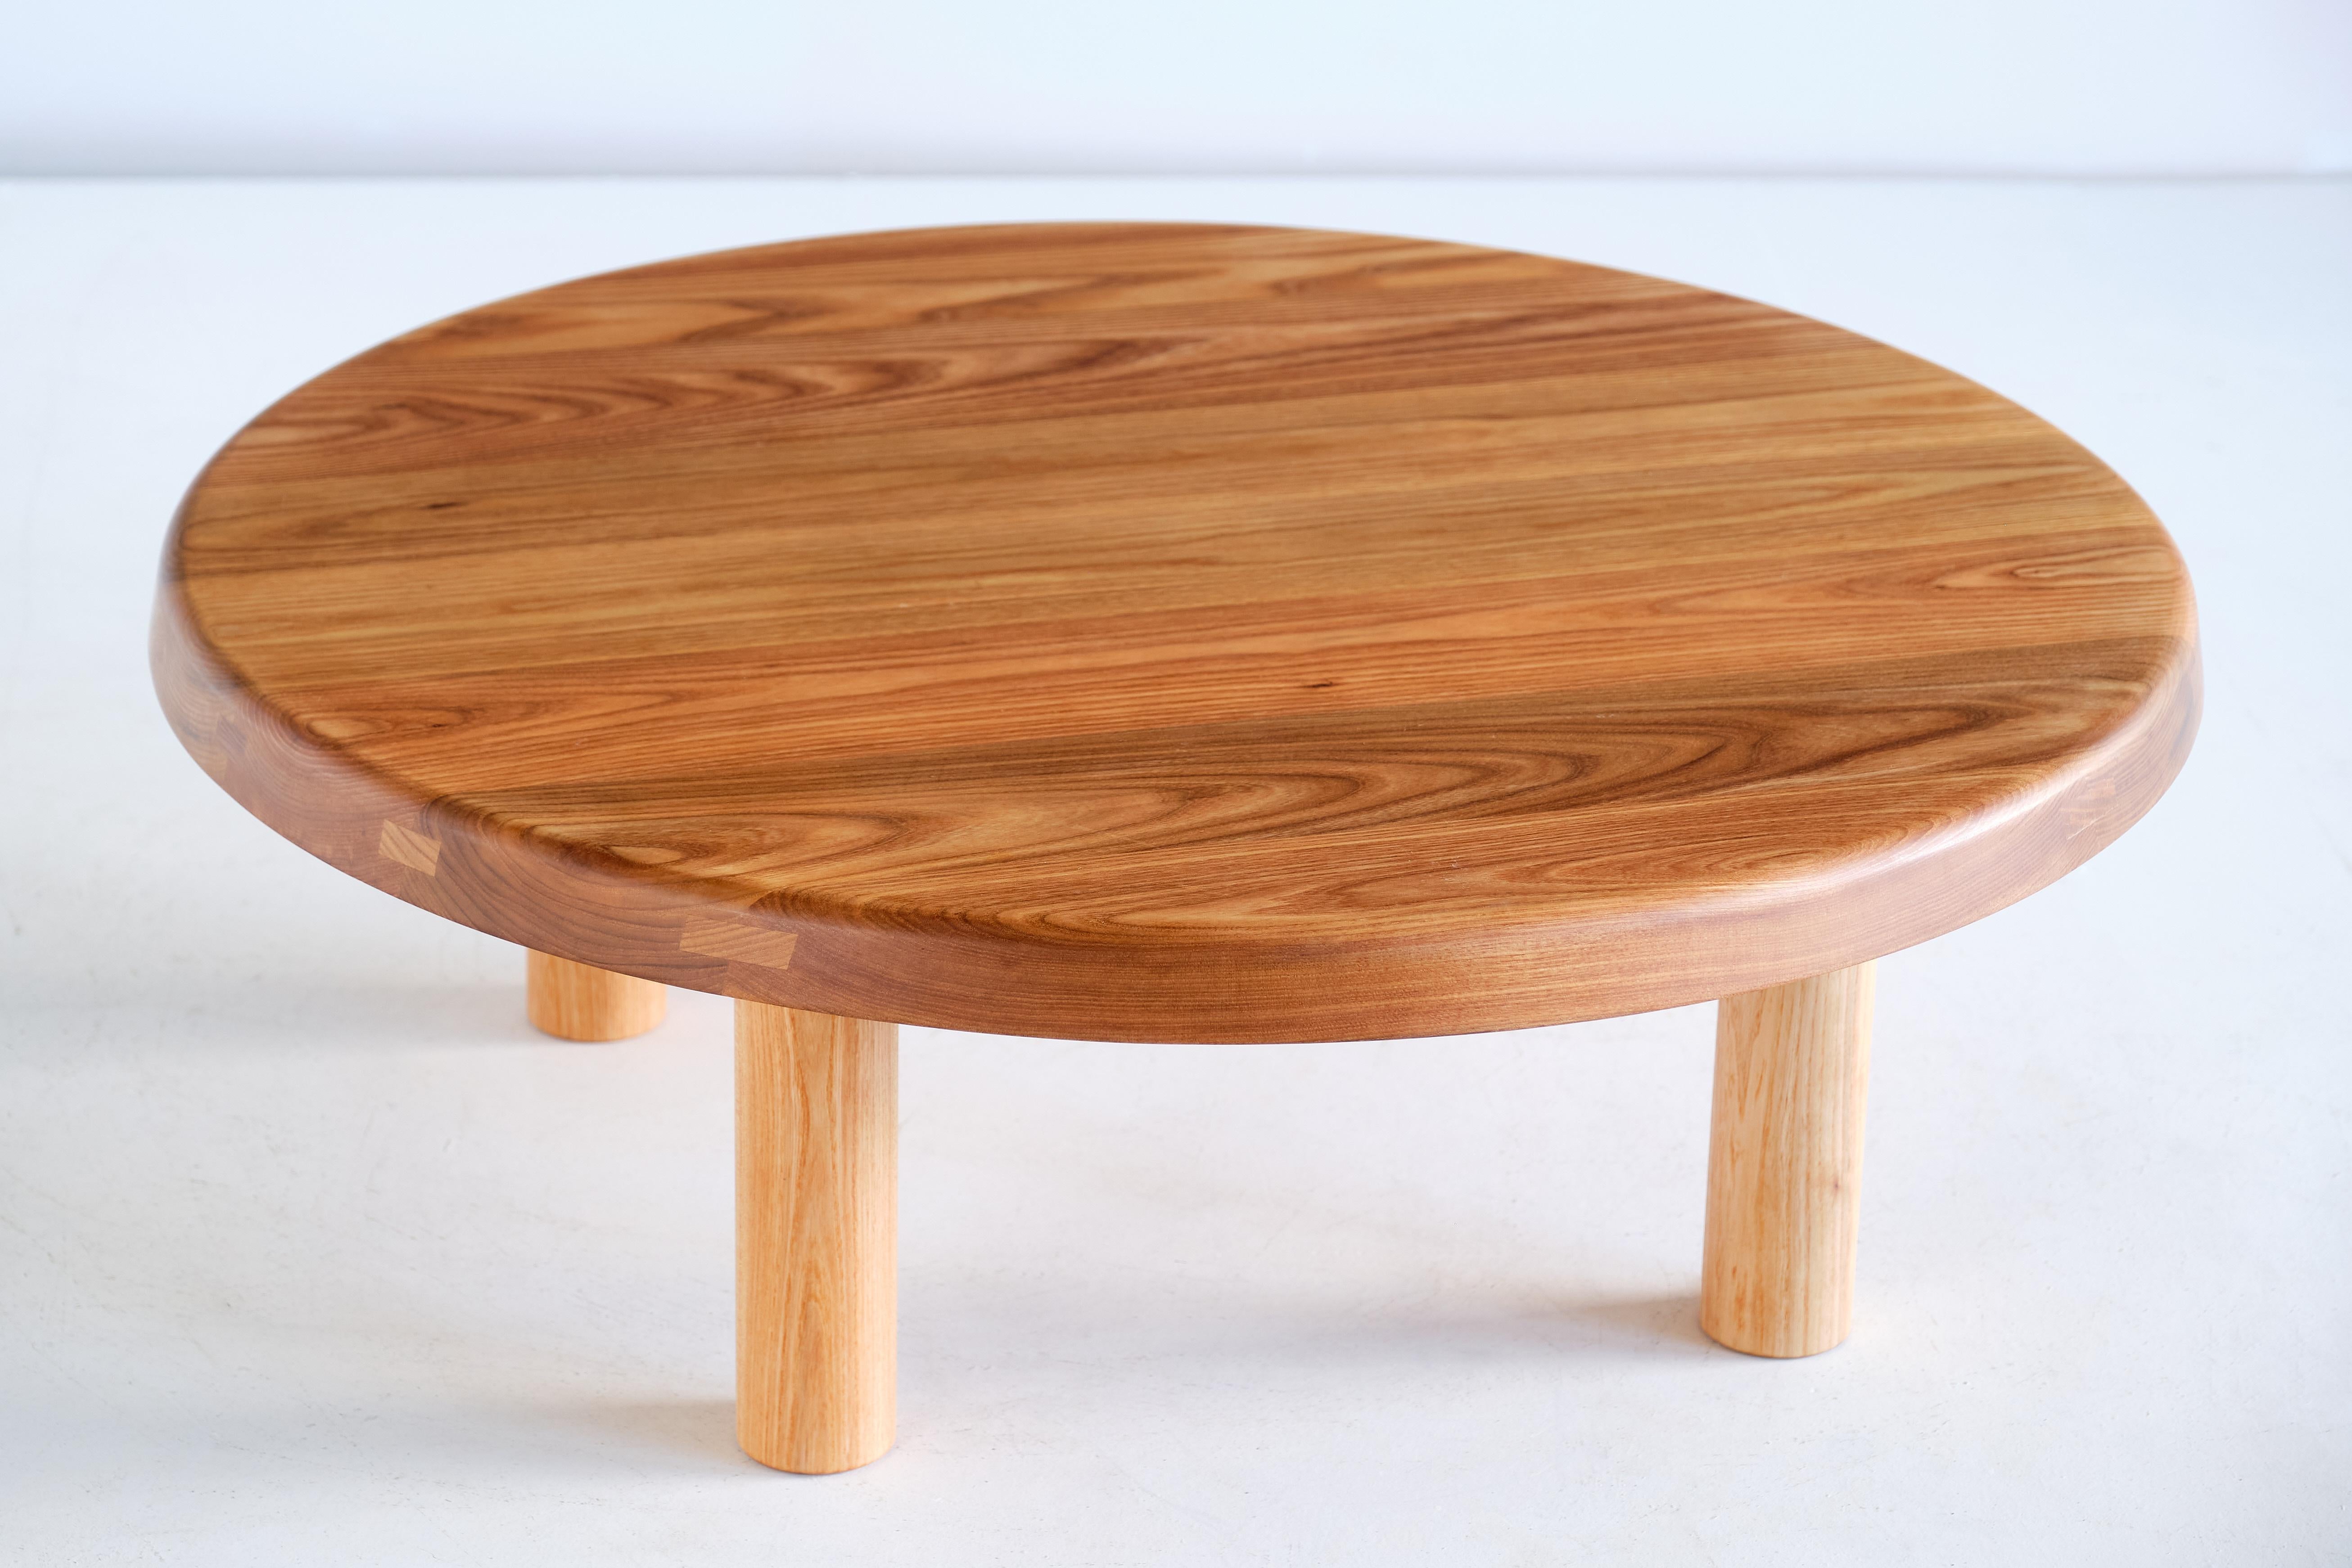 This striking coffee table is the model T02M designed by Pierre Chapo in 1963. The table is made of solid elm wood with a beautiful grain. The table can easily be converted into a dining table as the legs can be unscrewed from the top and replaced